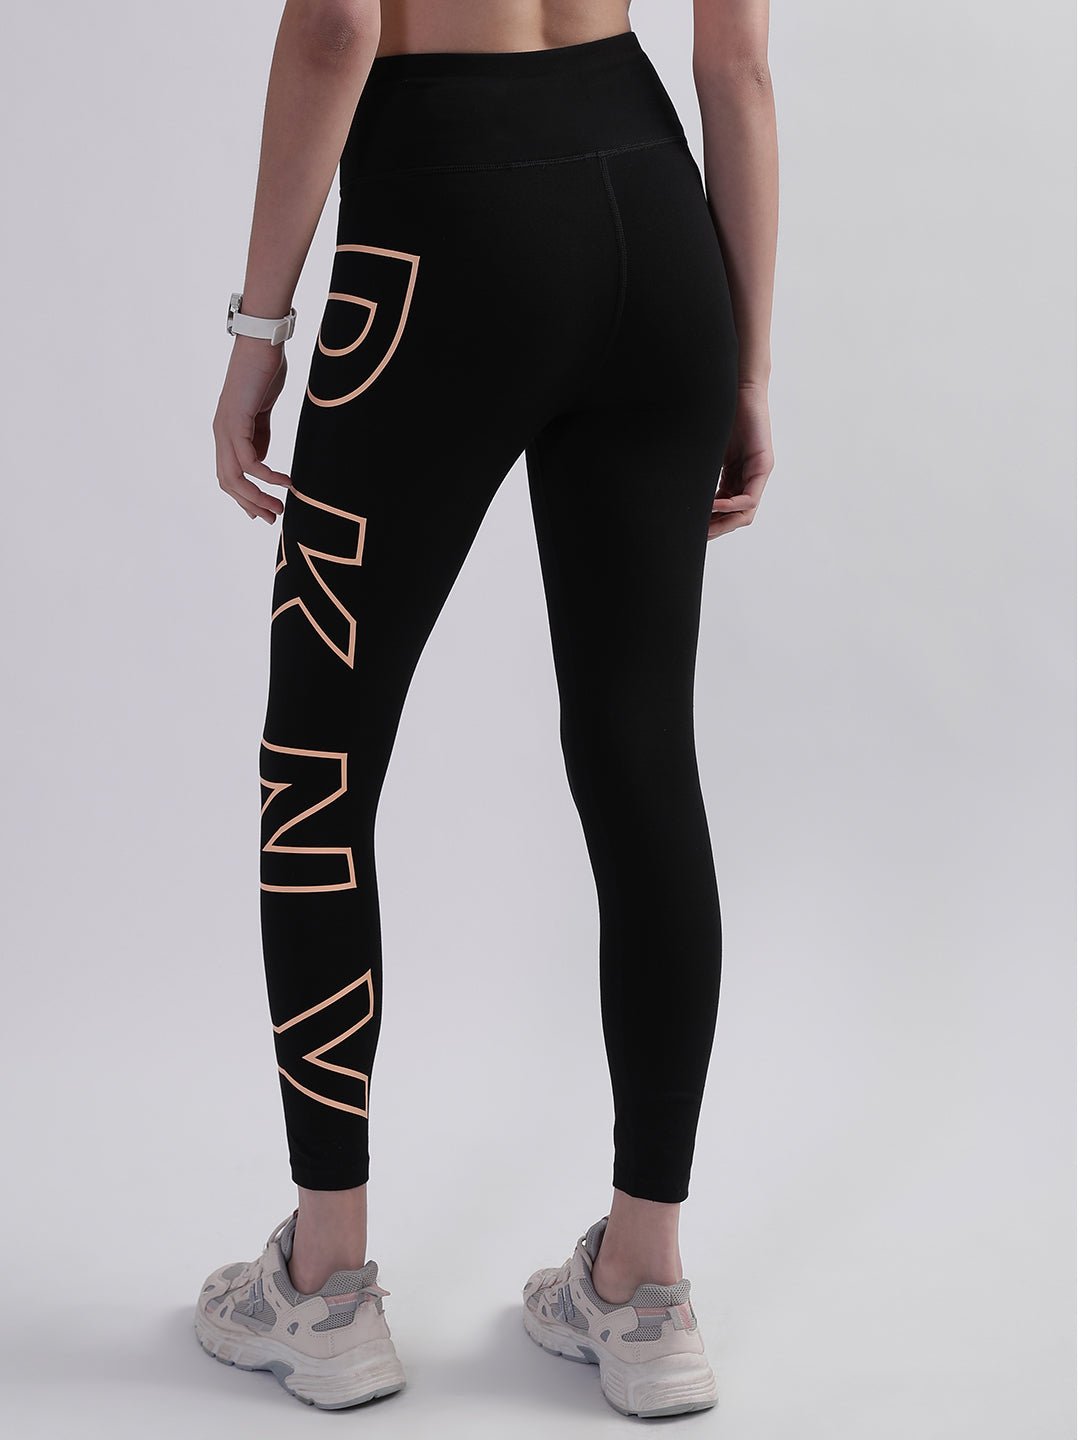 DKNY Women Peach Solid Fitted Leggings